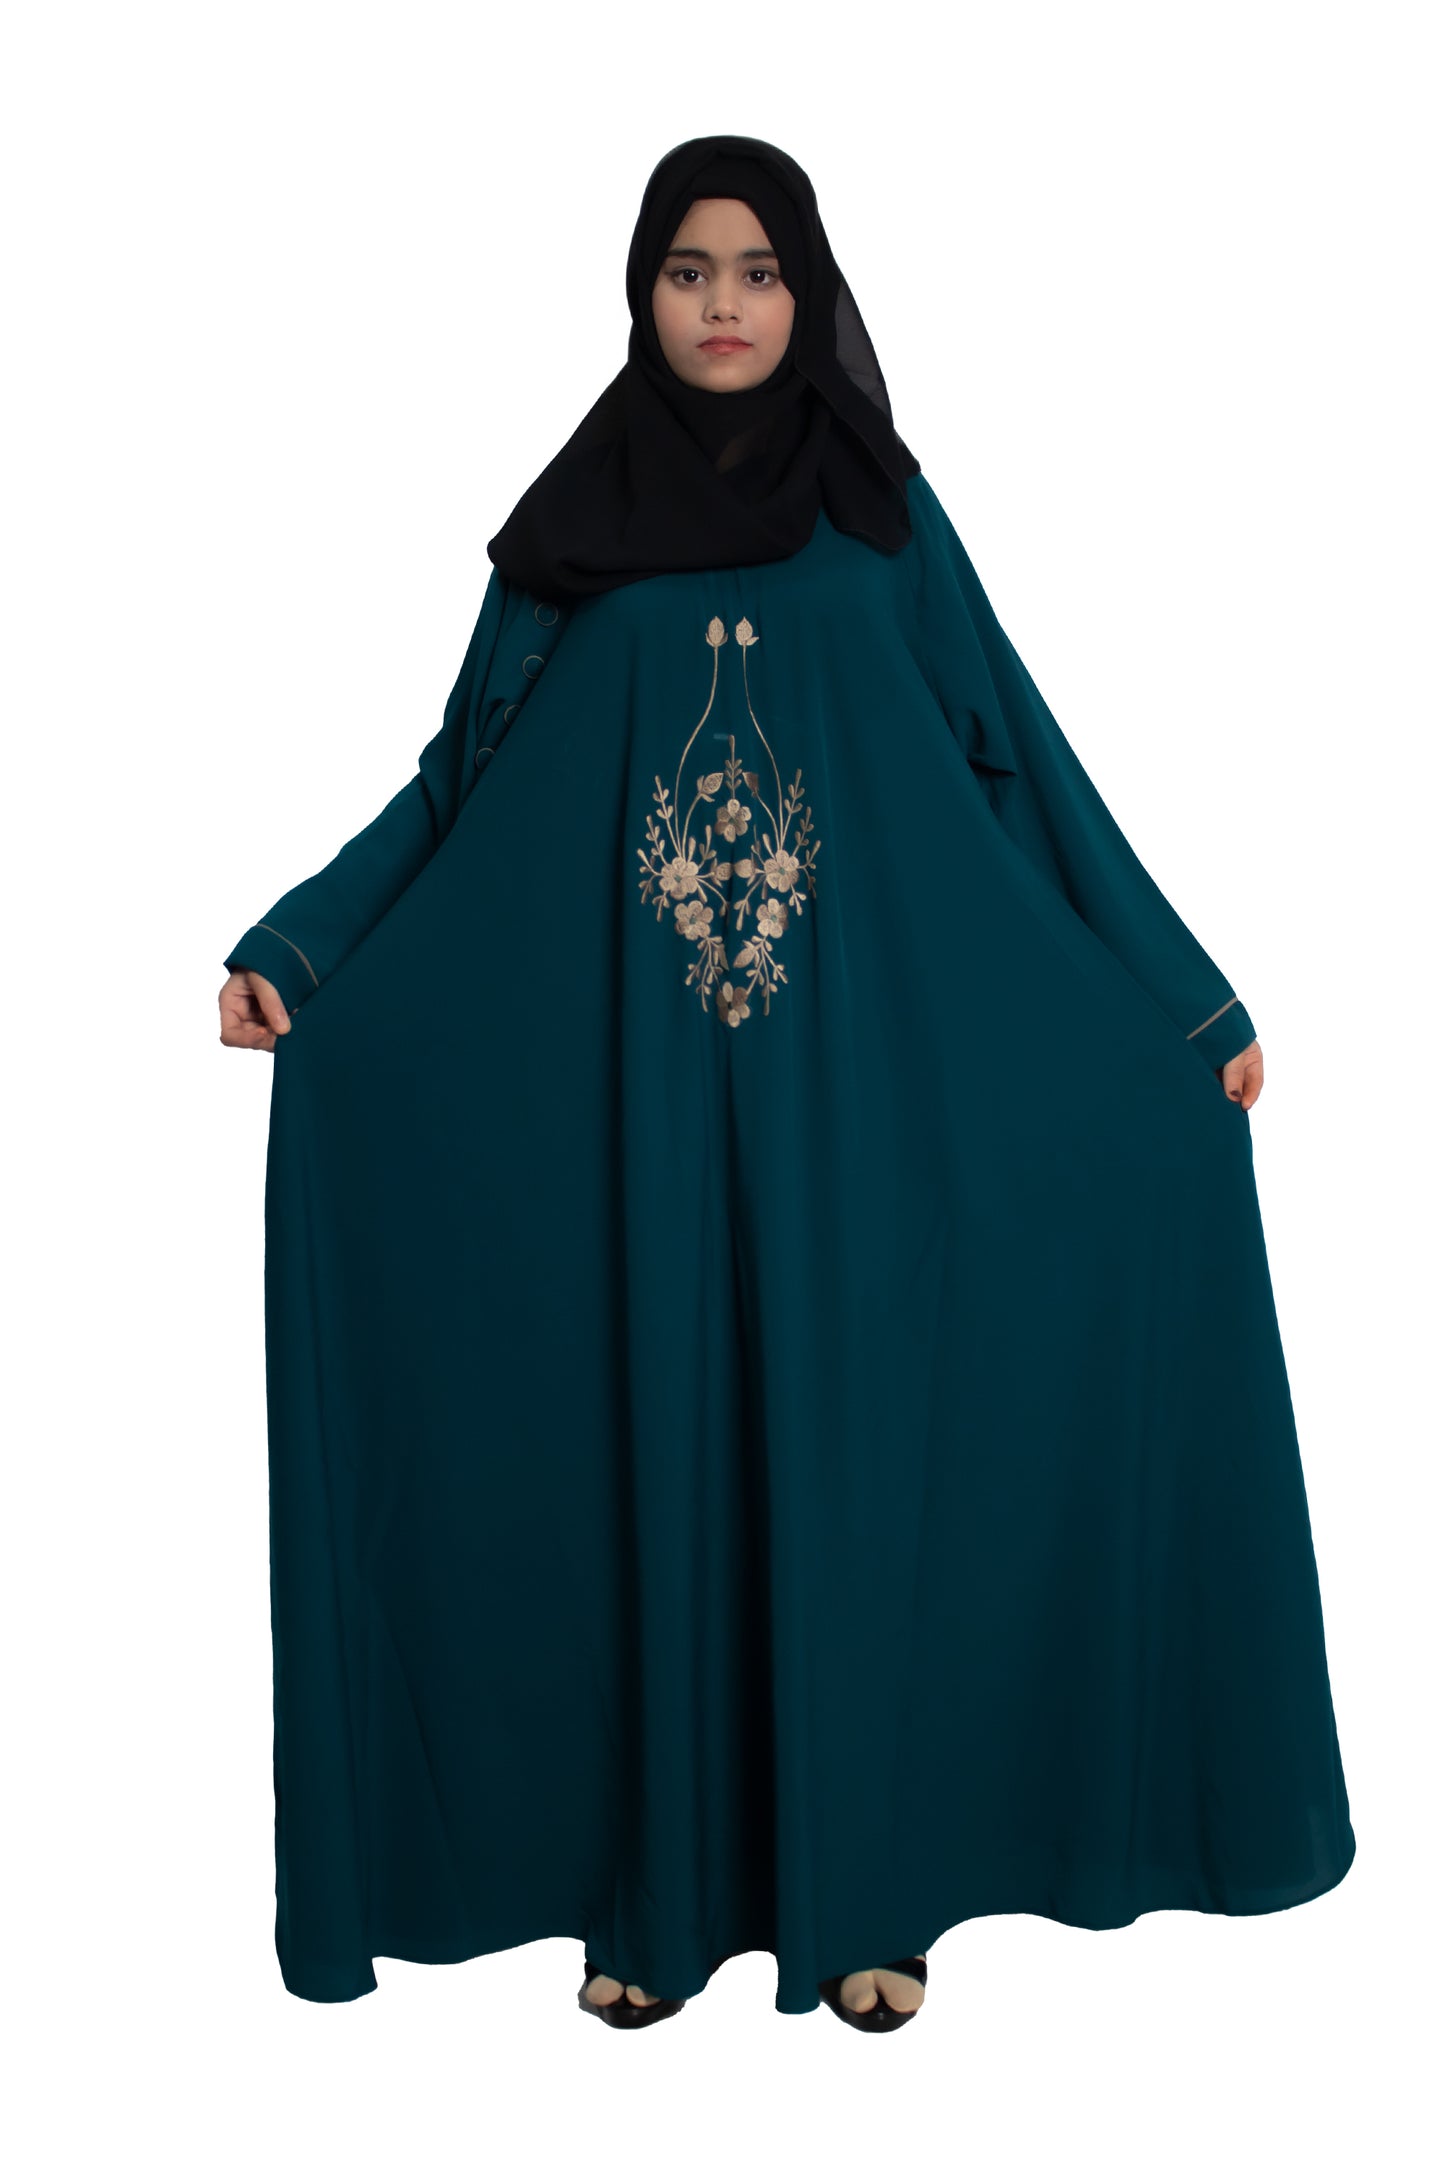 Modest City Self Design Ramagreen With Beige Embroidery Crepe Abaya Or Burqa With Hijab for Women & Girls-Series Laiba